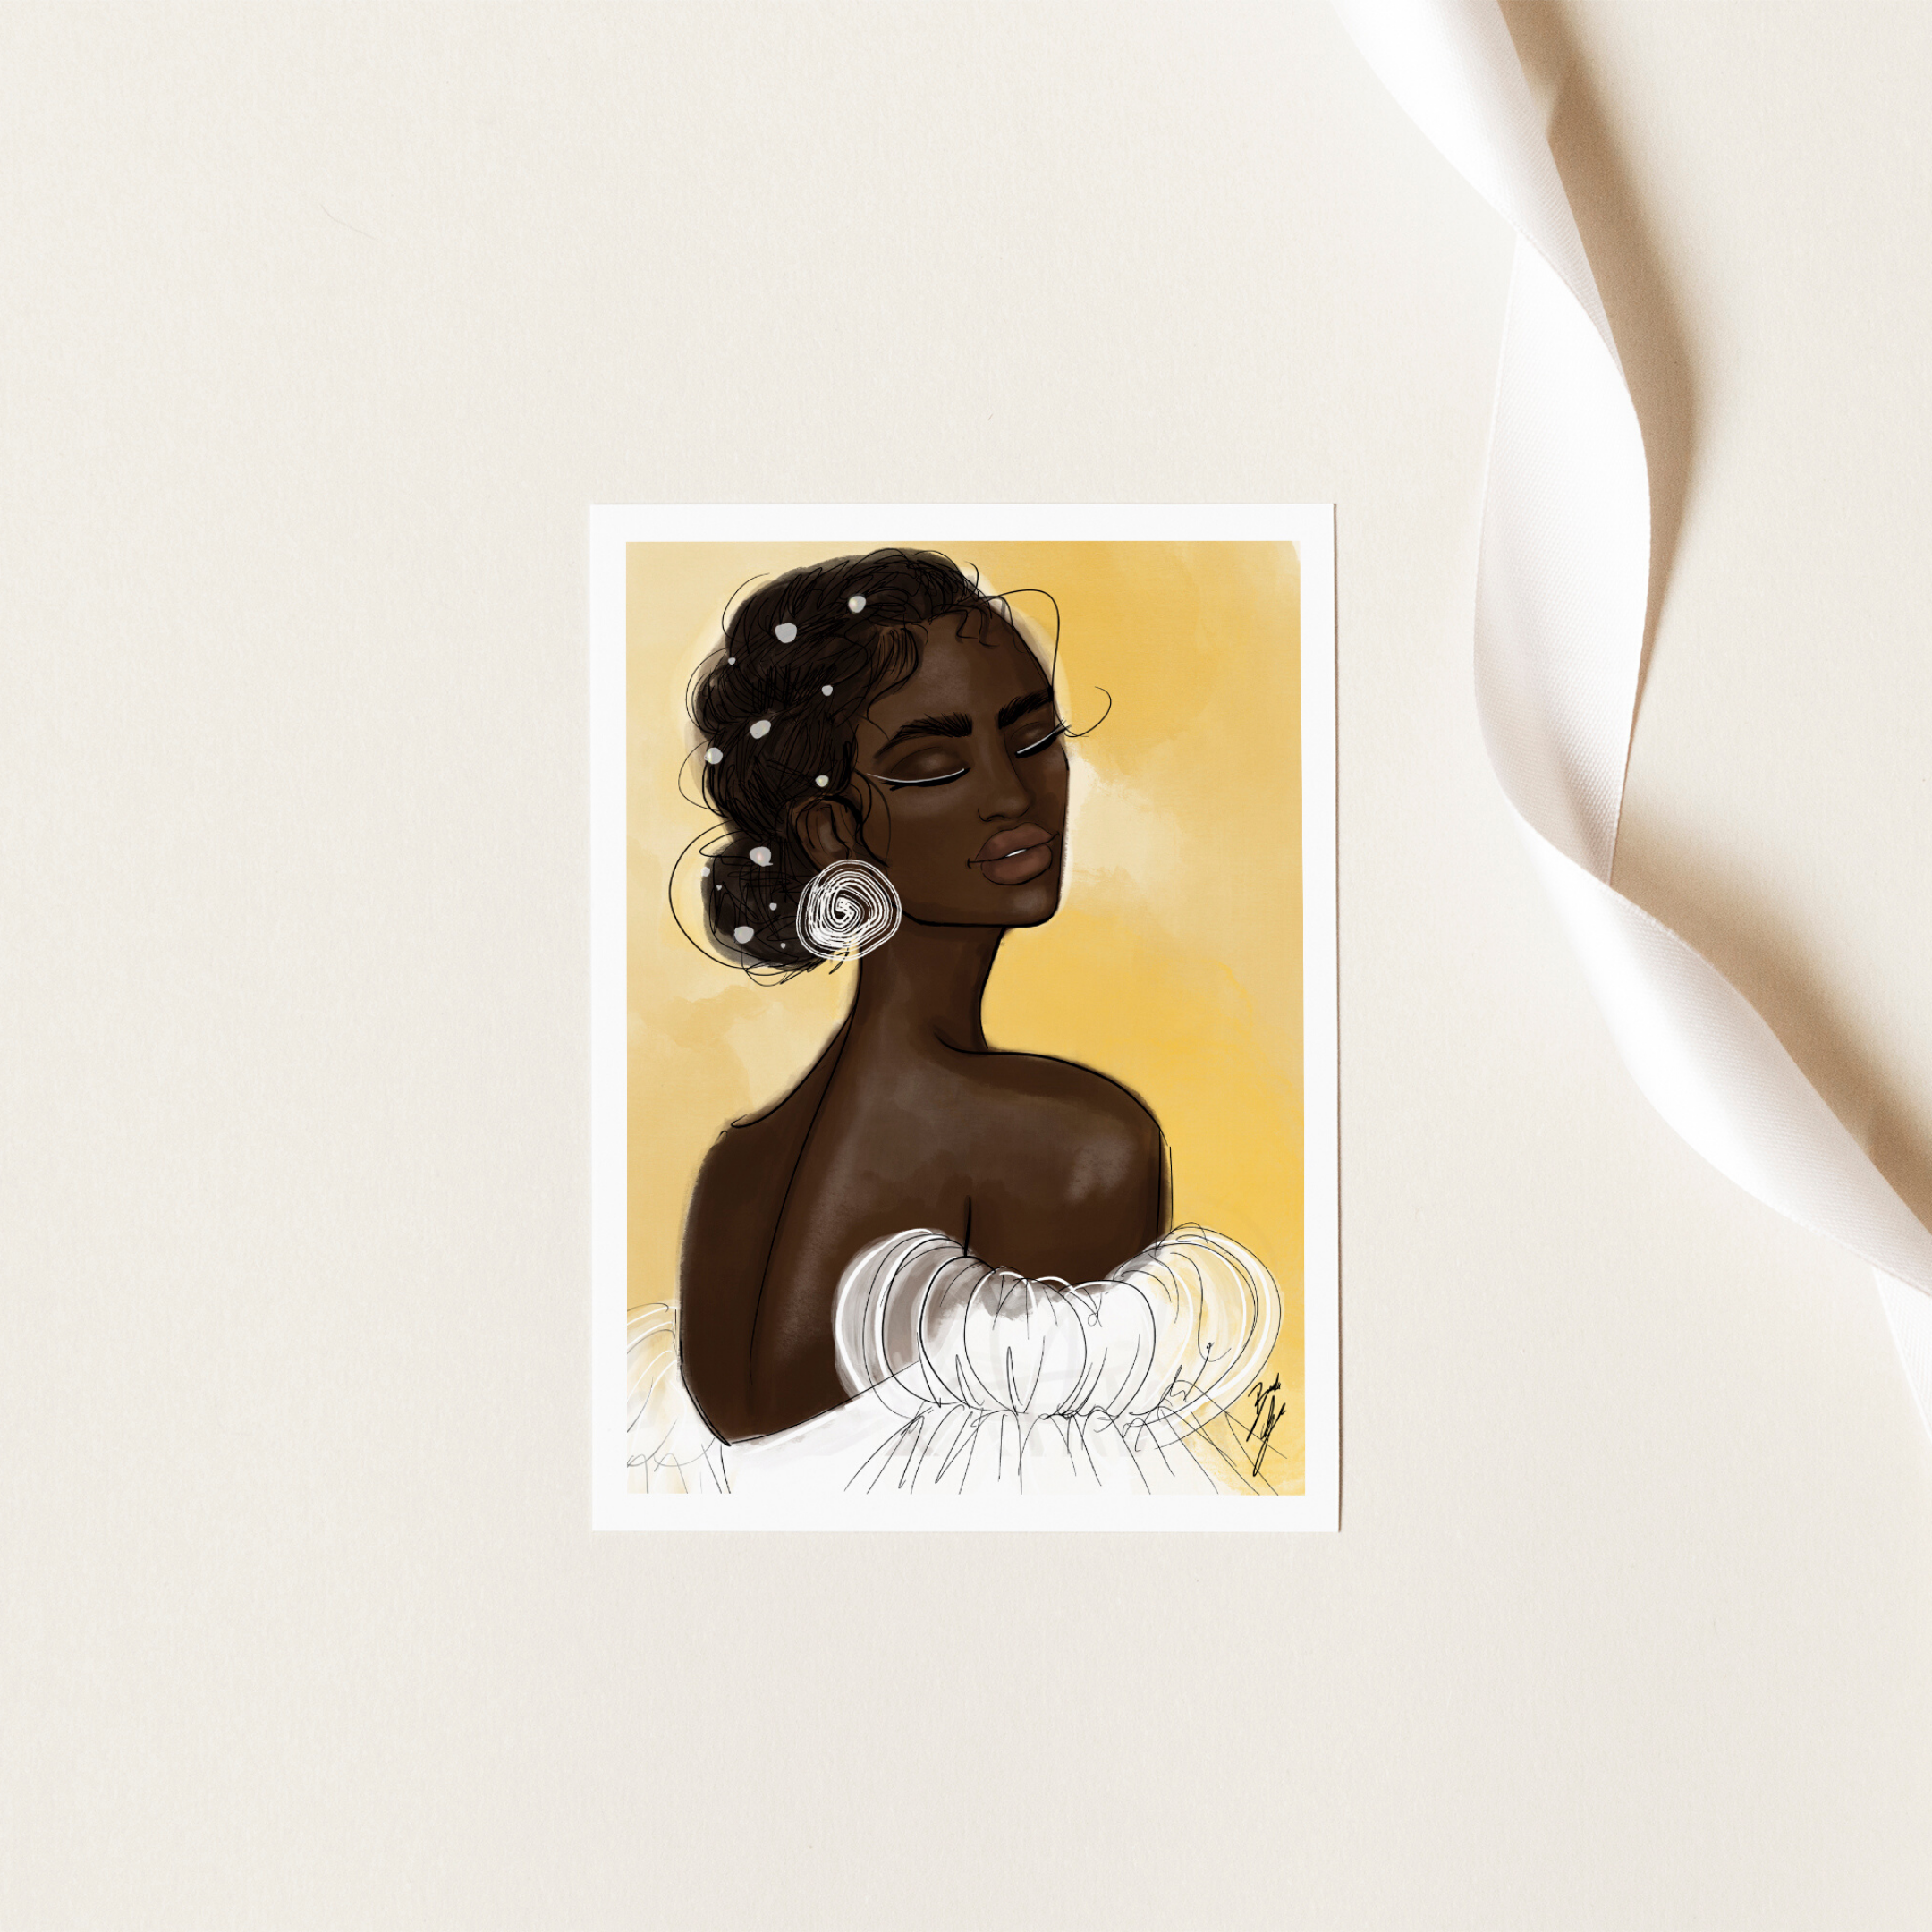 Fashion and Beauty Black Girl Art Print. Printed on 100% cotton, slightly textured, archival fine art paper. Size includes 1/2 inch border on all sides for framing. Beauty wall art home decor. gift ideas 